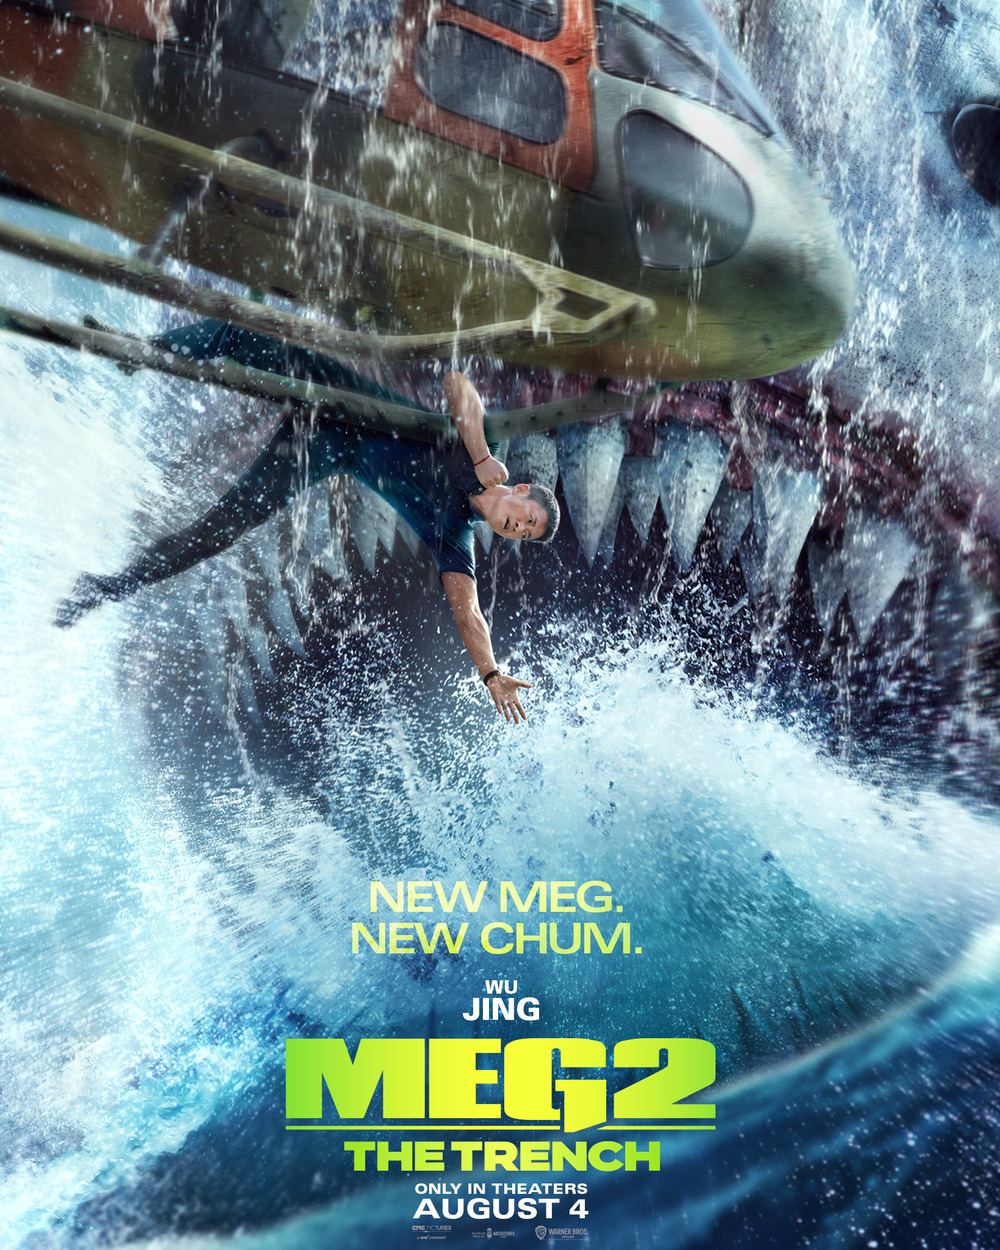 https://www.newdvdreleasedates.com/images/posters/large/the-meg-2-the-trench-2023-05.jpg